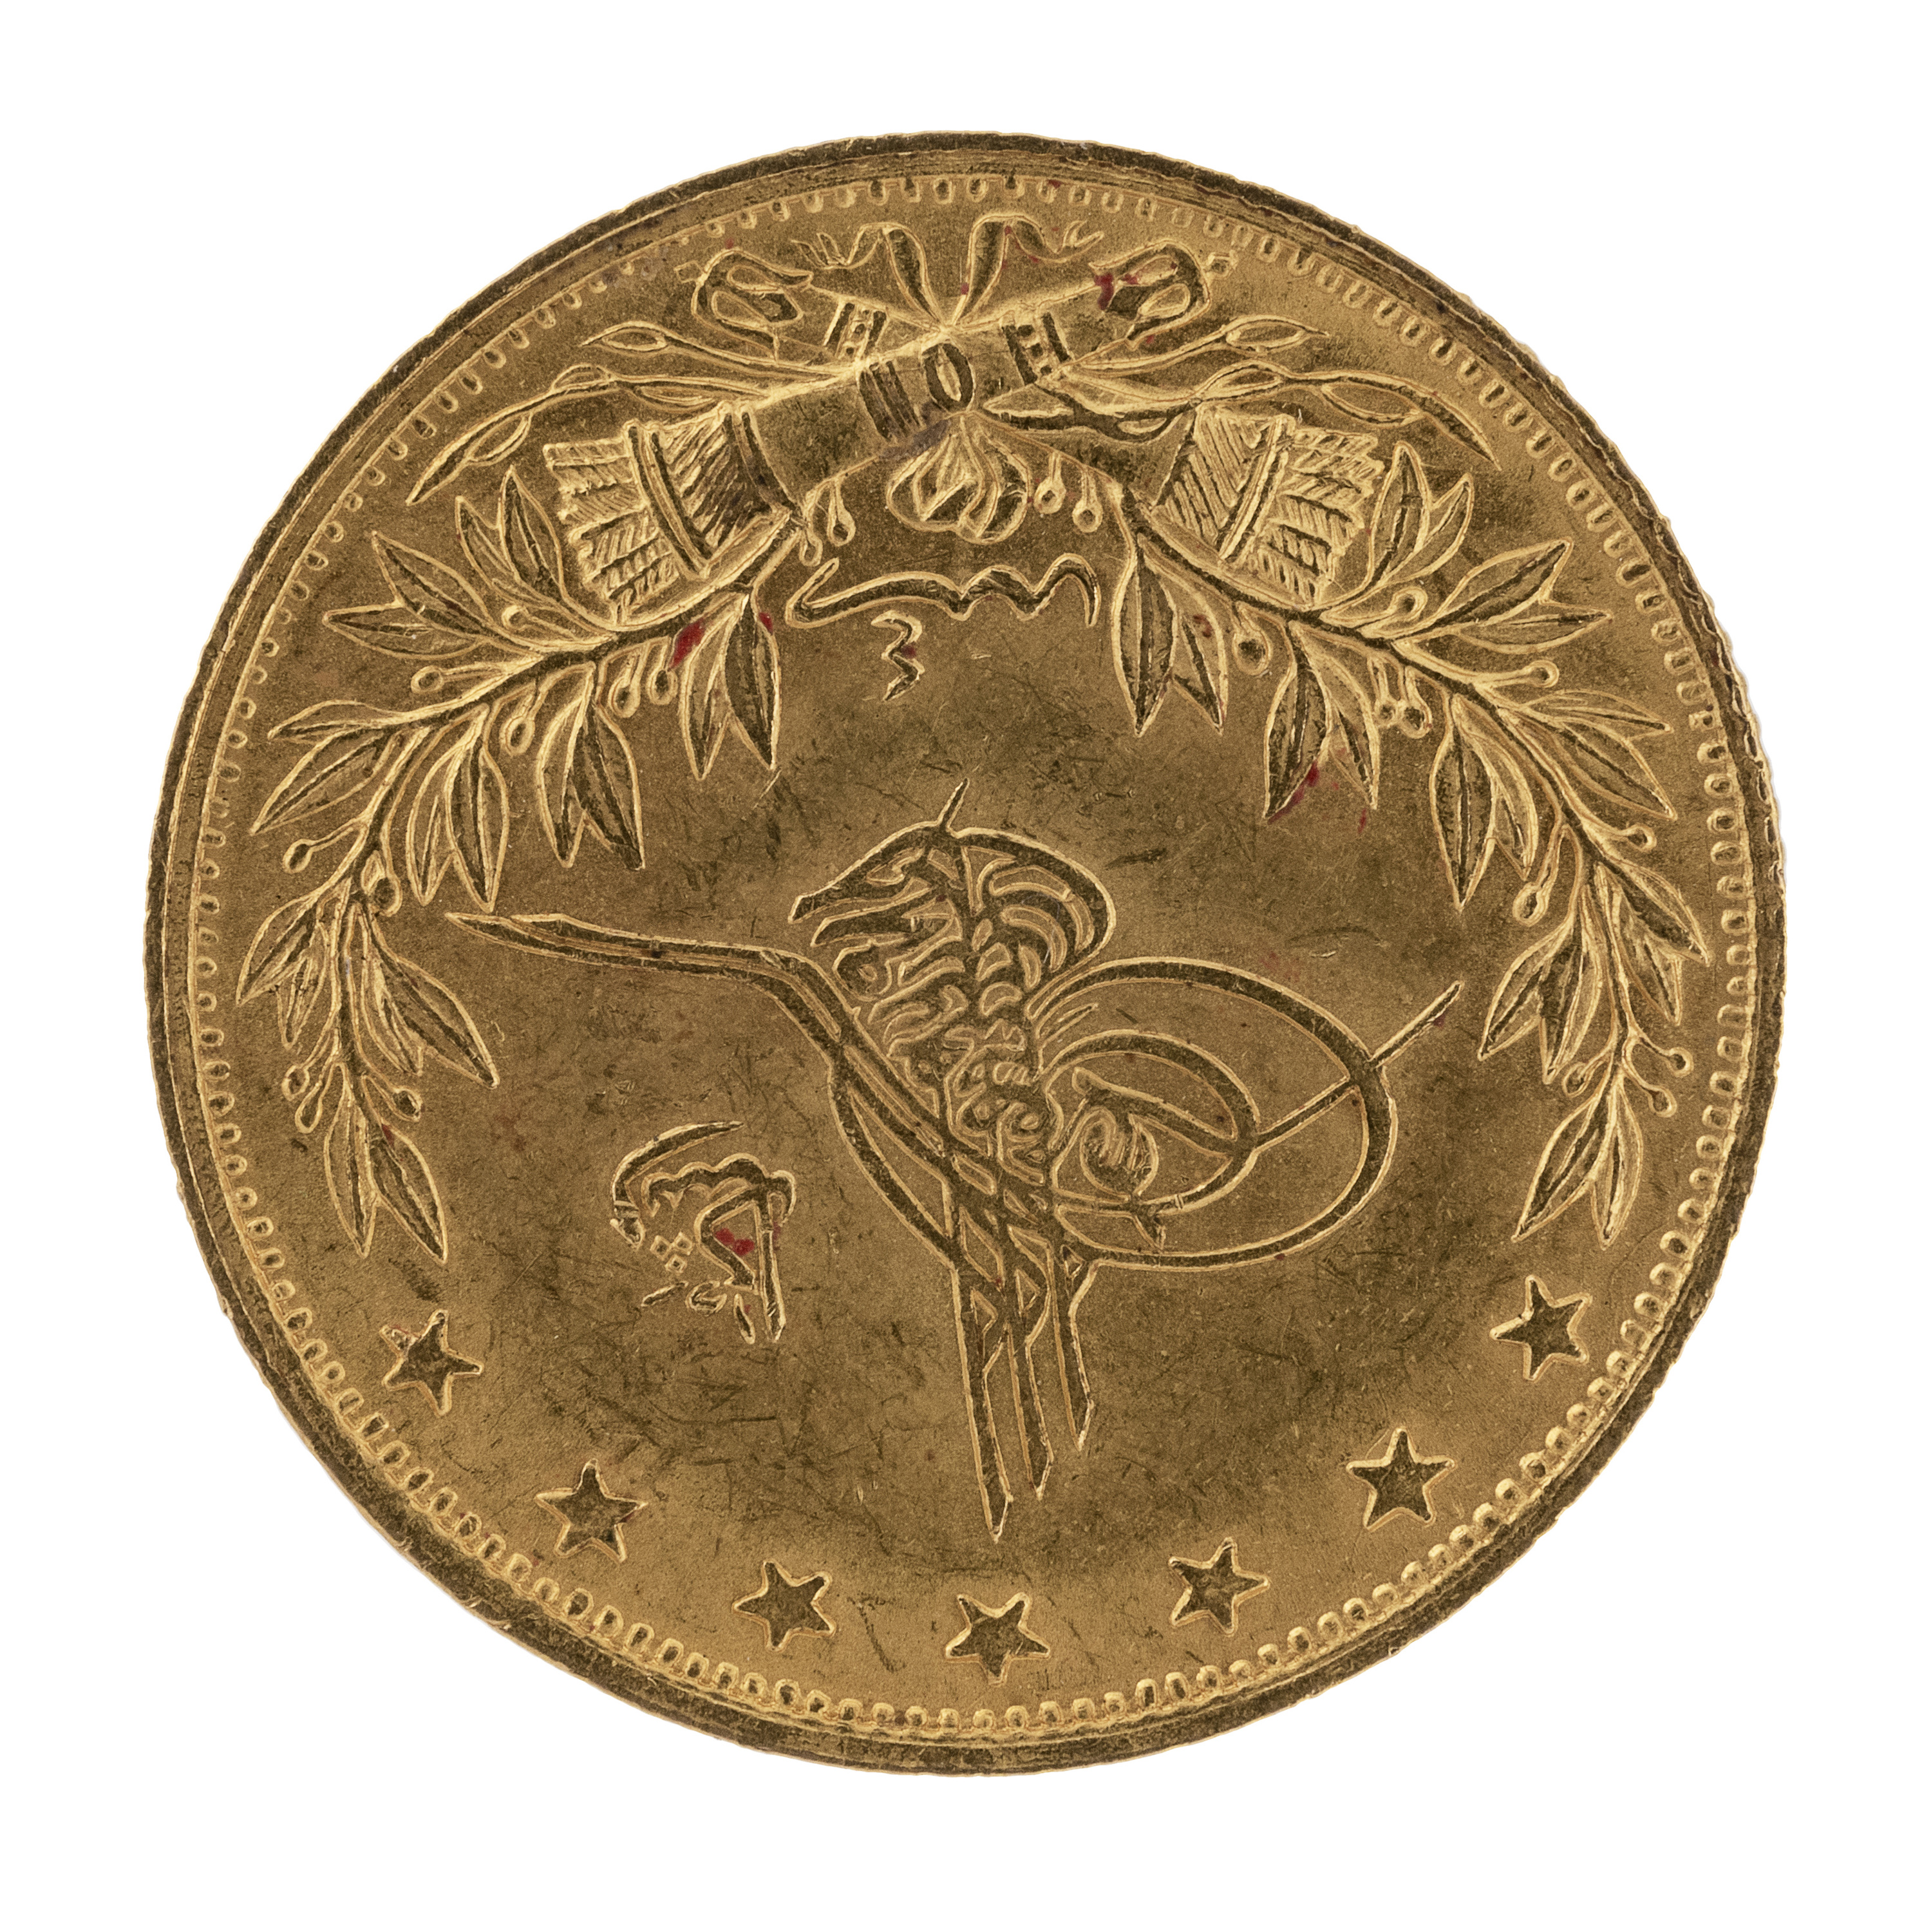 GOLD COIN TURKEY EARLY 20TH CENTURY